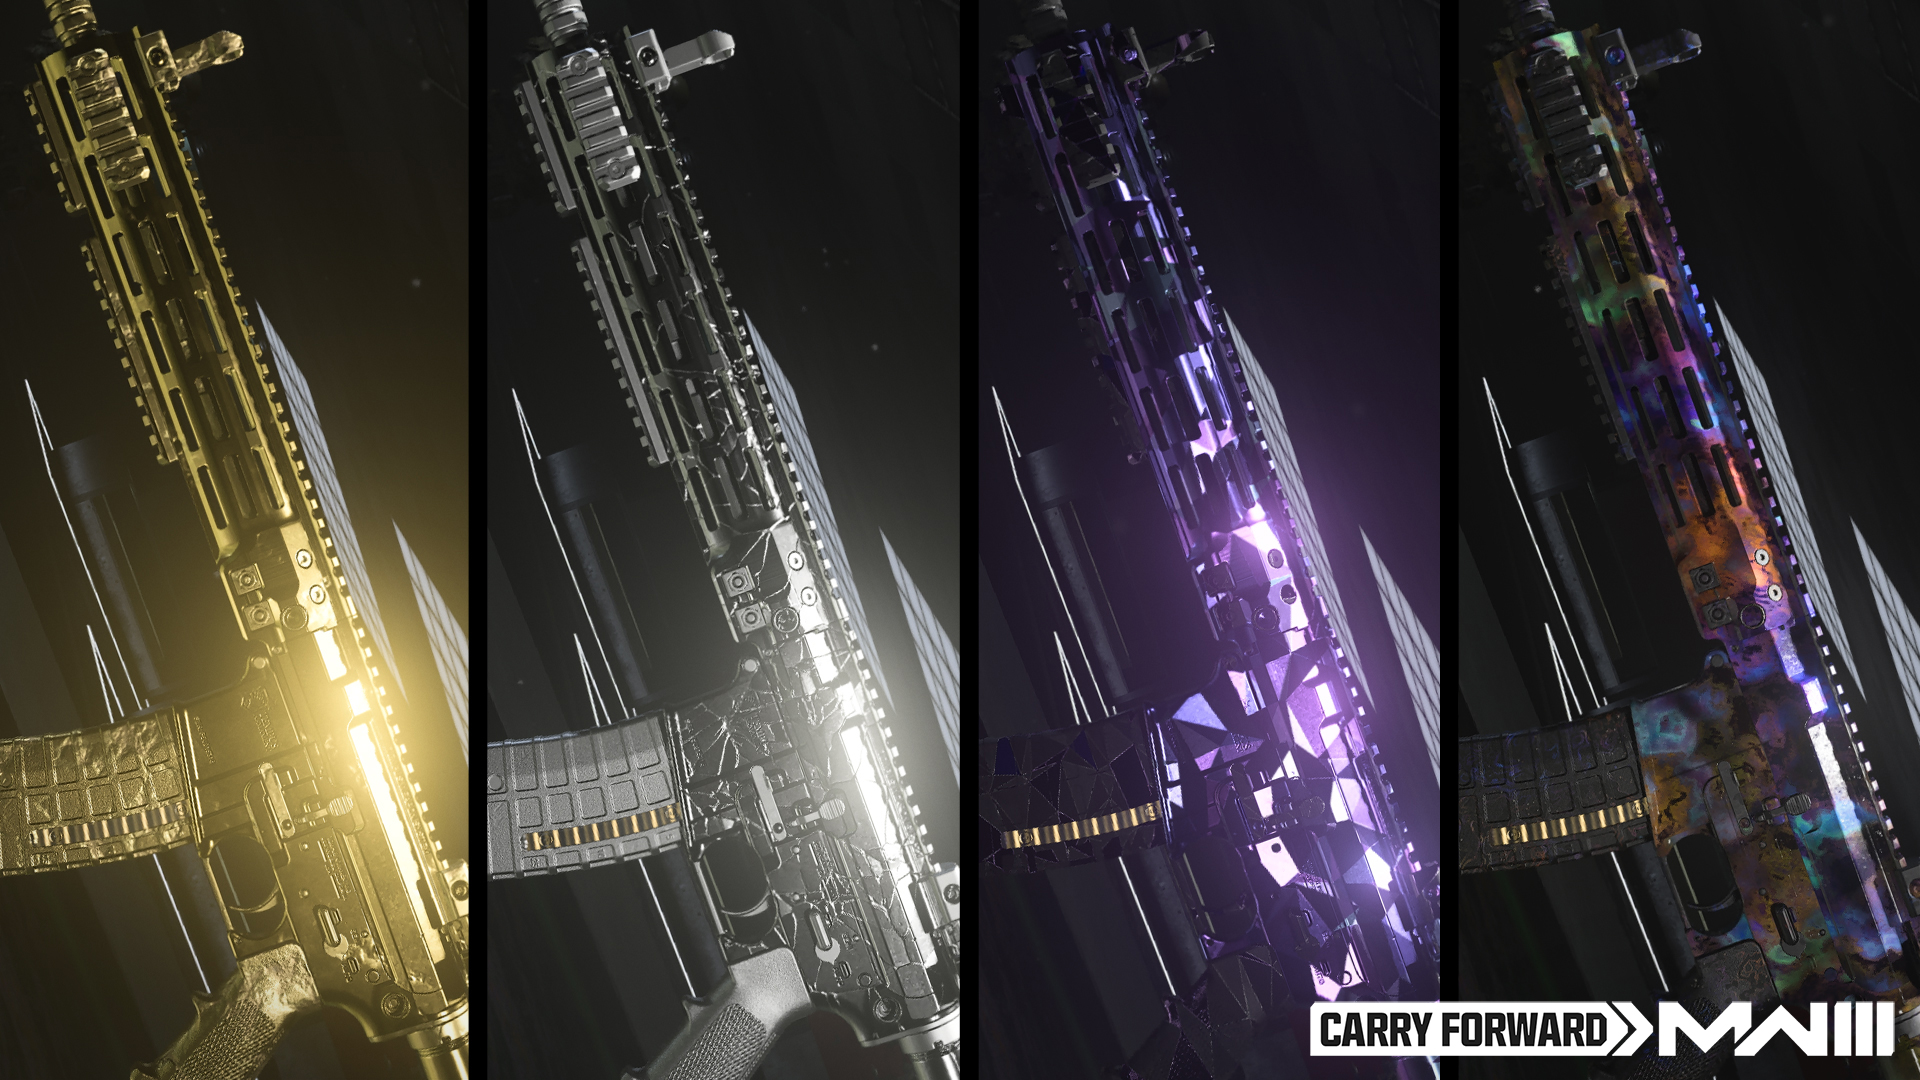 An image of all MW3 multiplayer Mastery camos for MW2 guns.